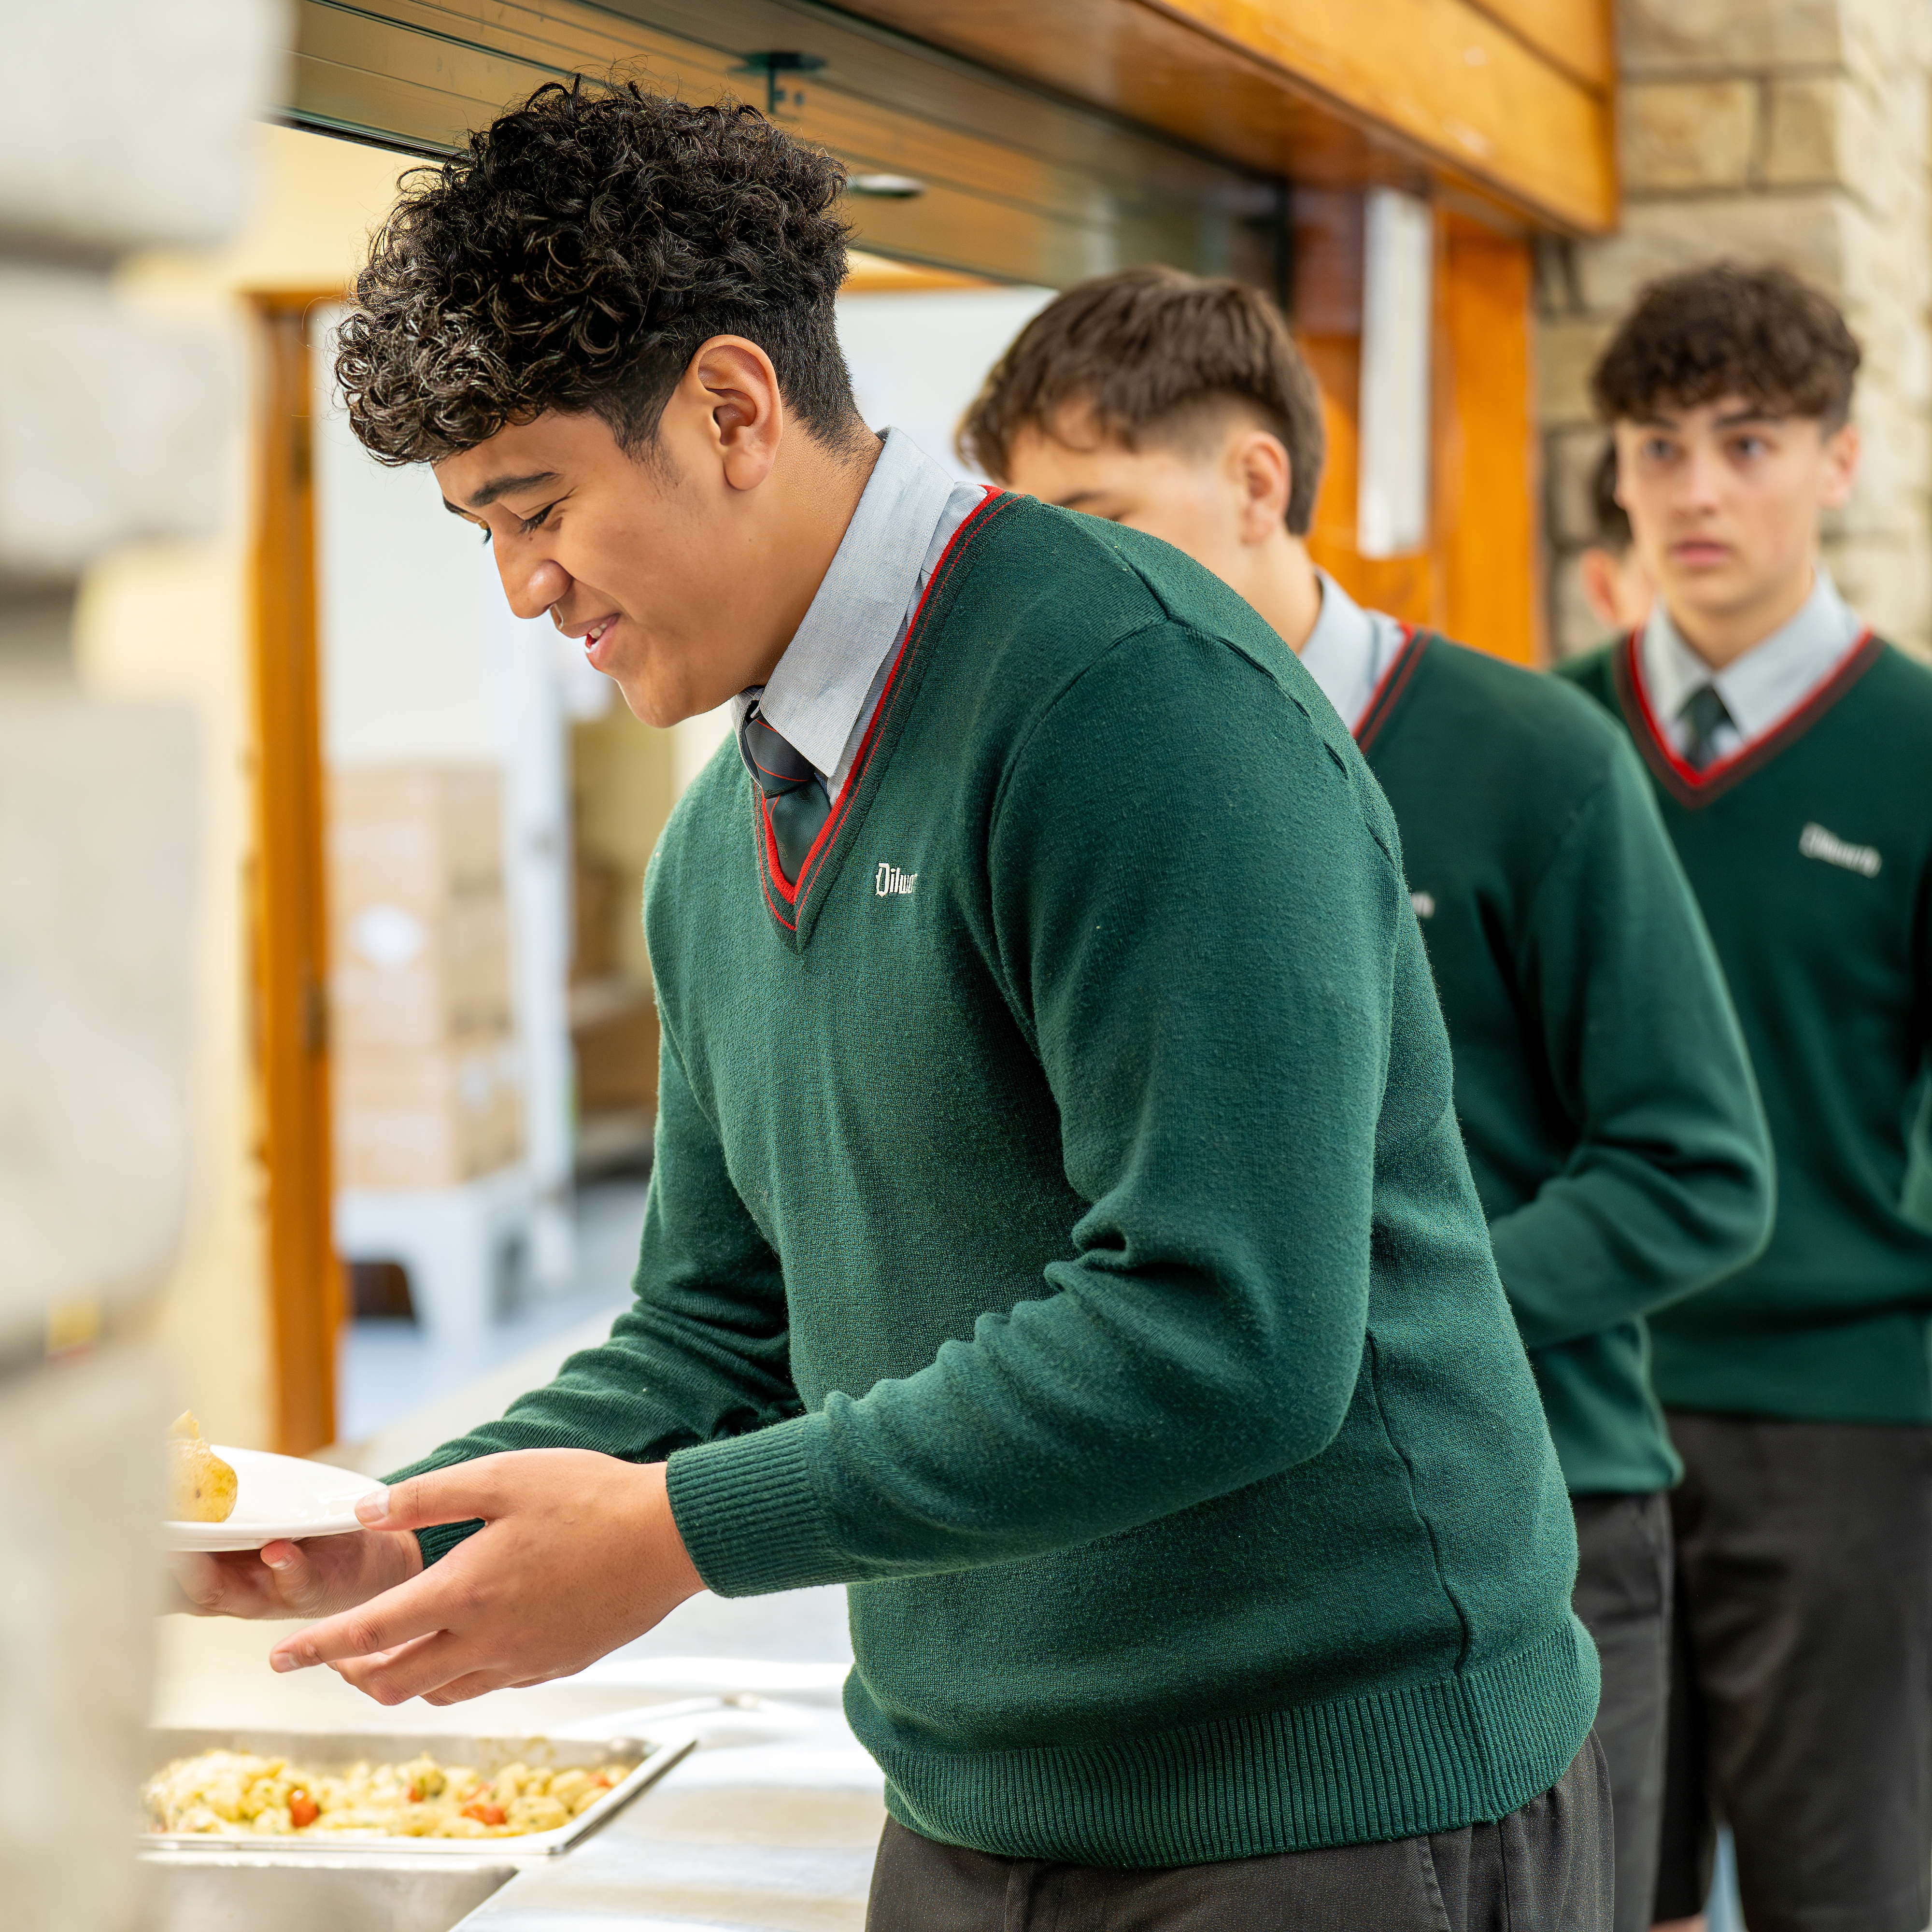 students being served lunch in the dining hall